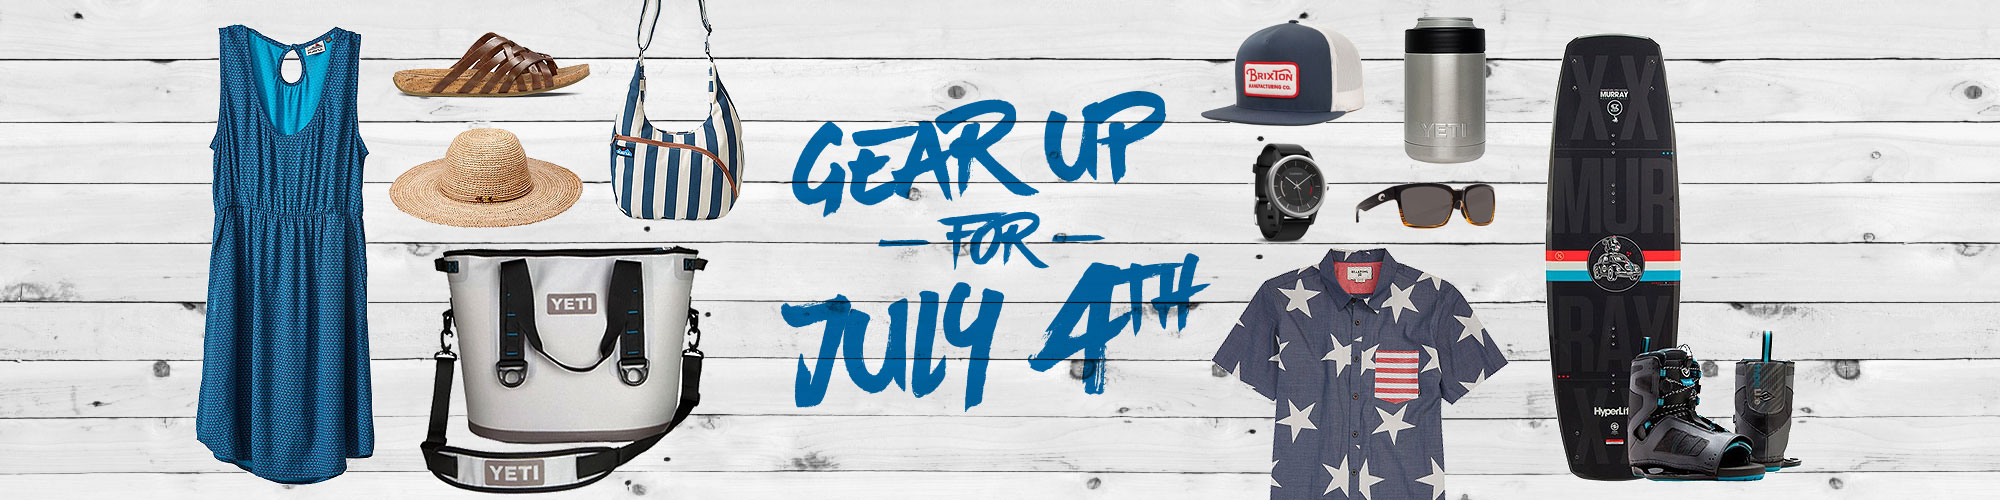 Gear up for July 4th